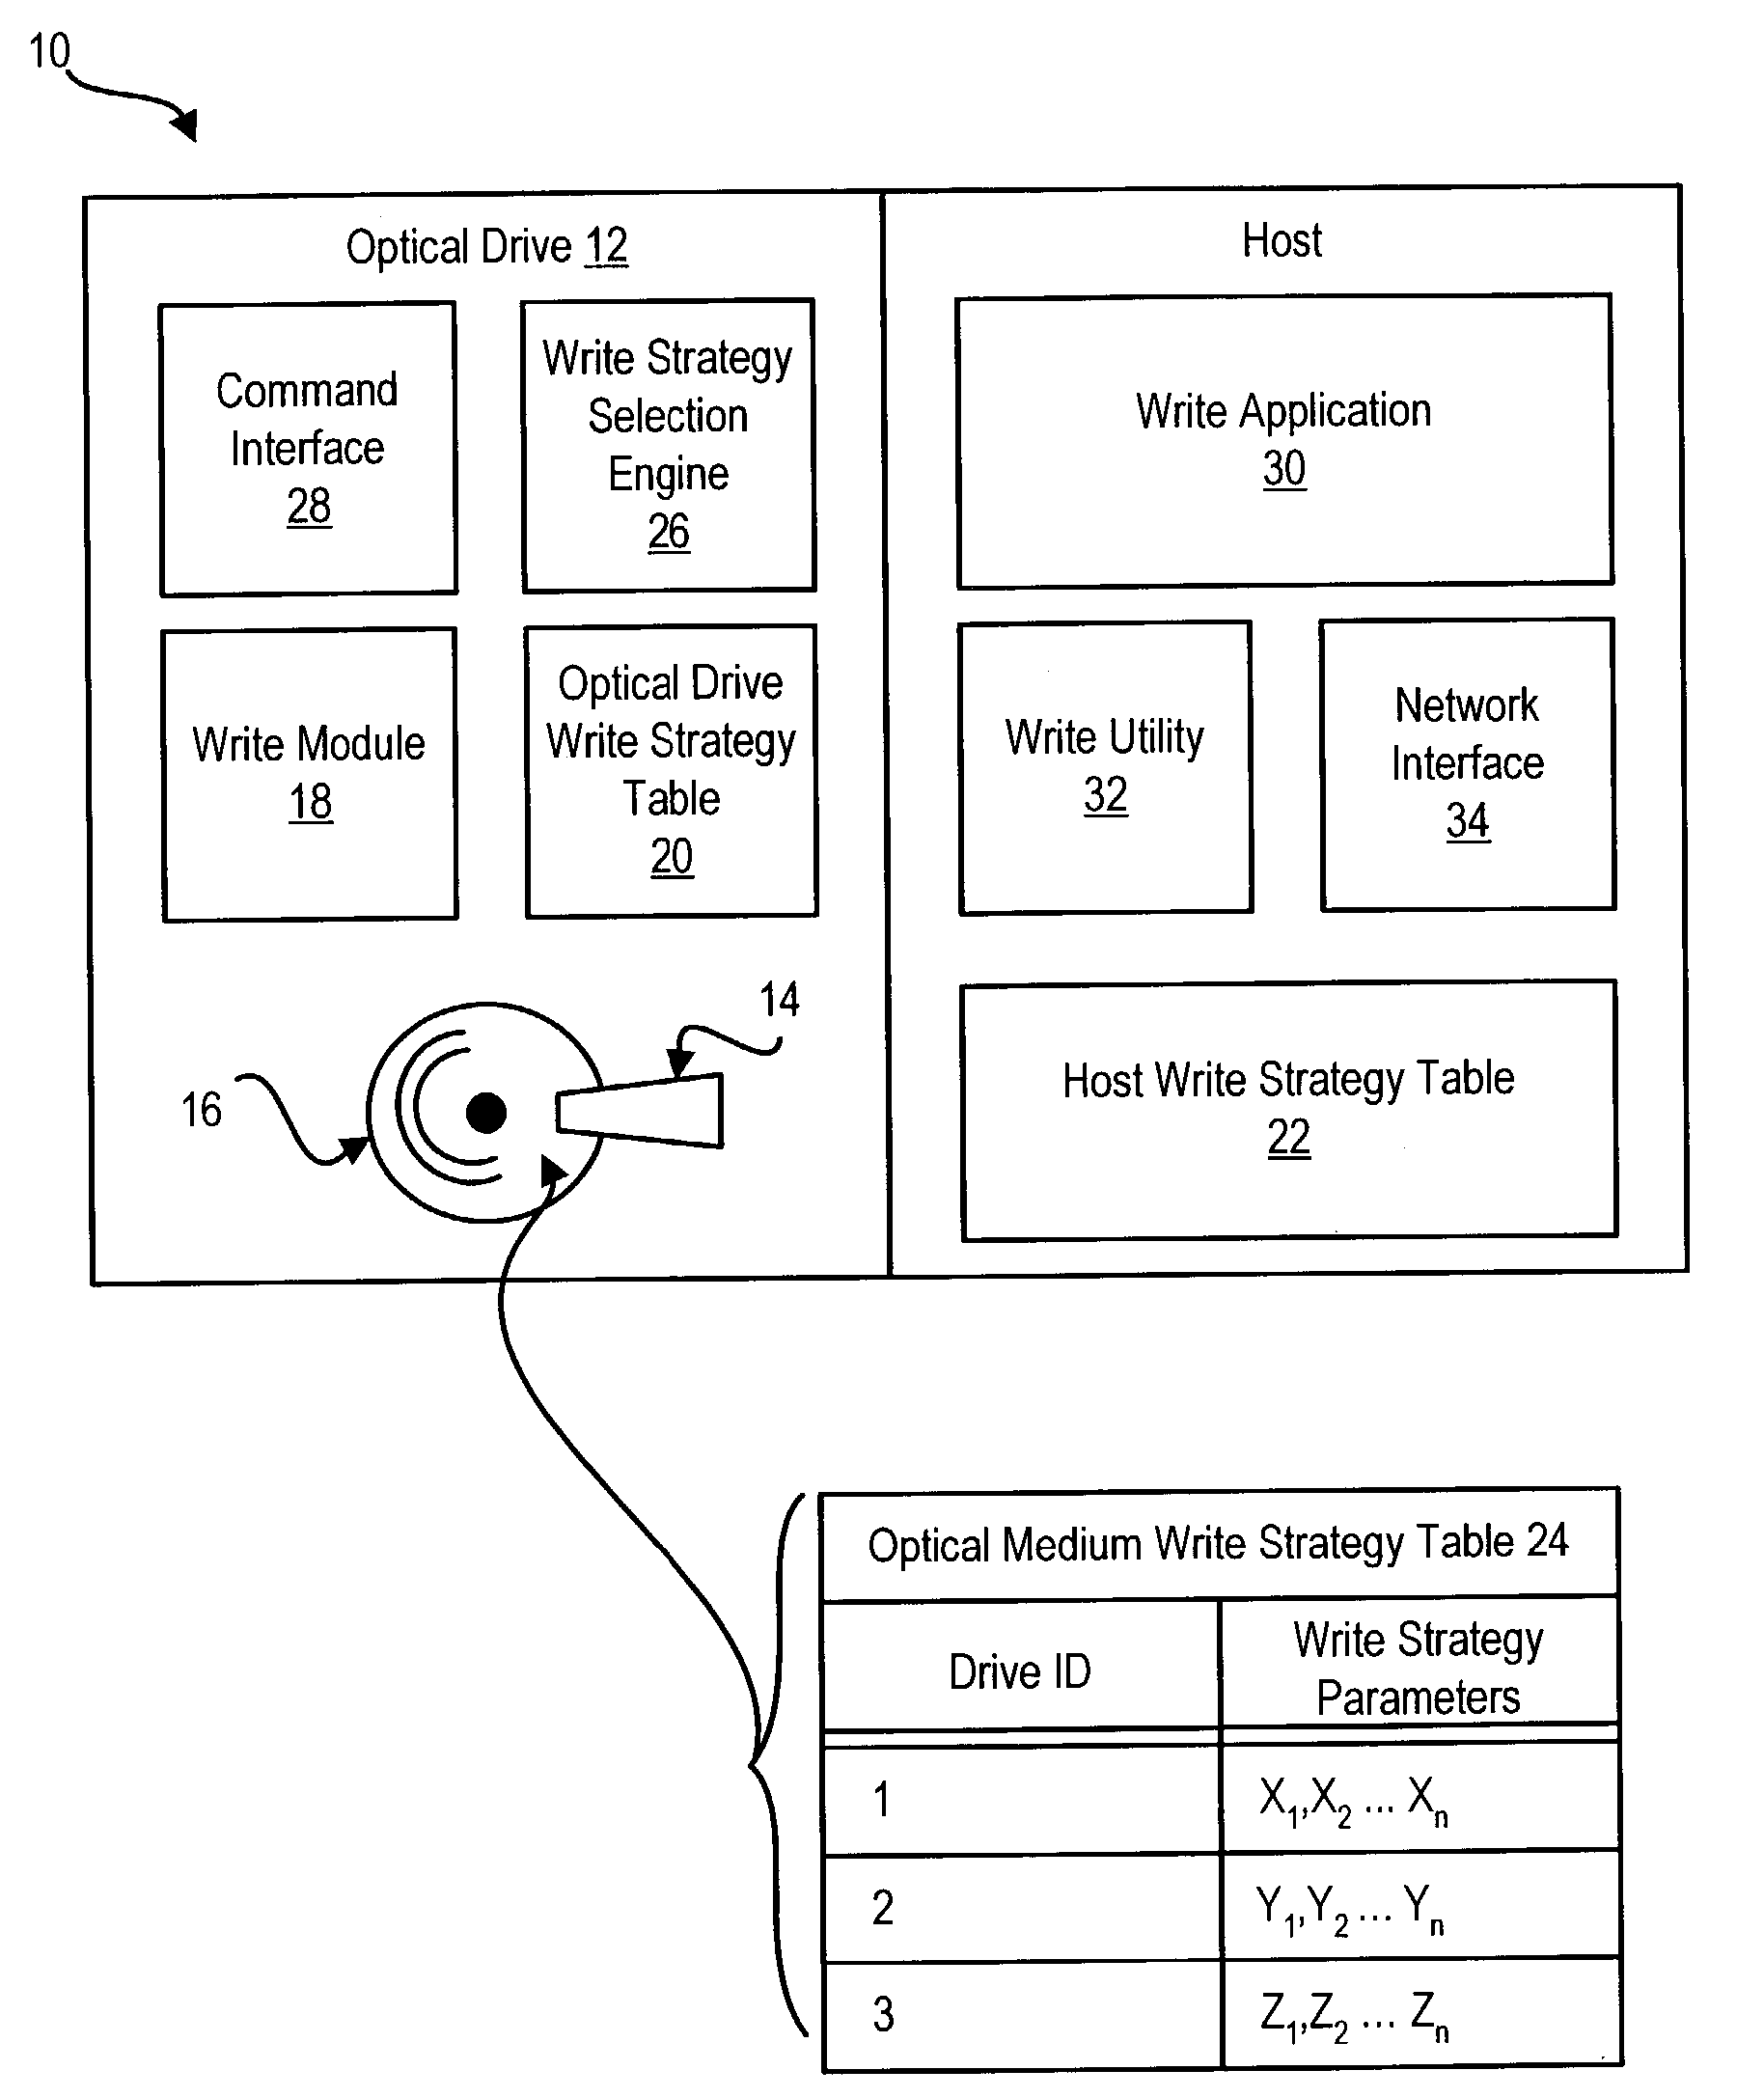 Method and system for optical drive write strategies embedded in an optical medium